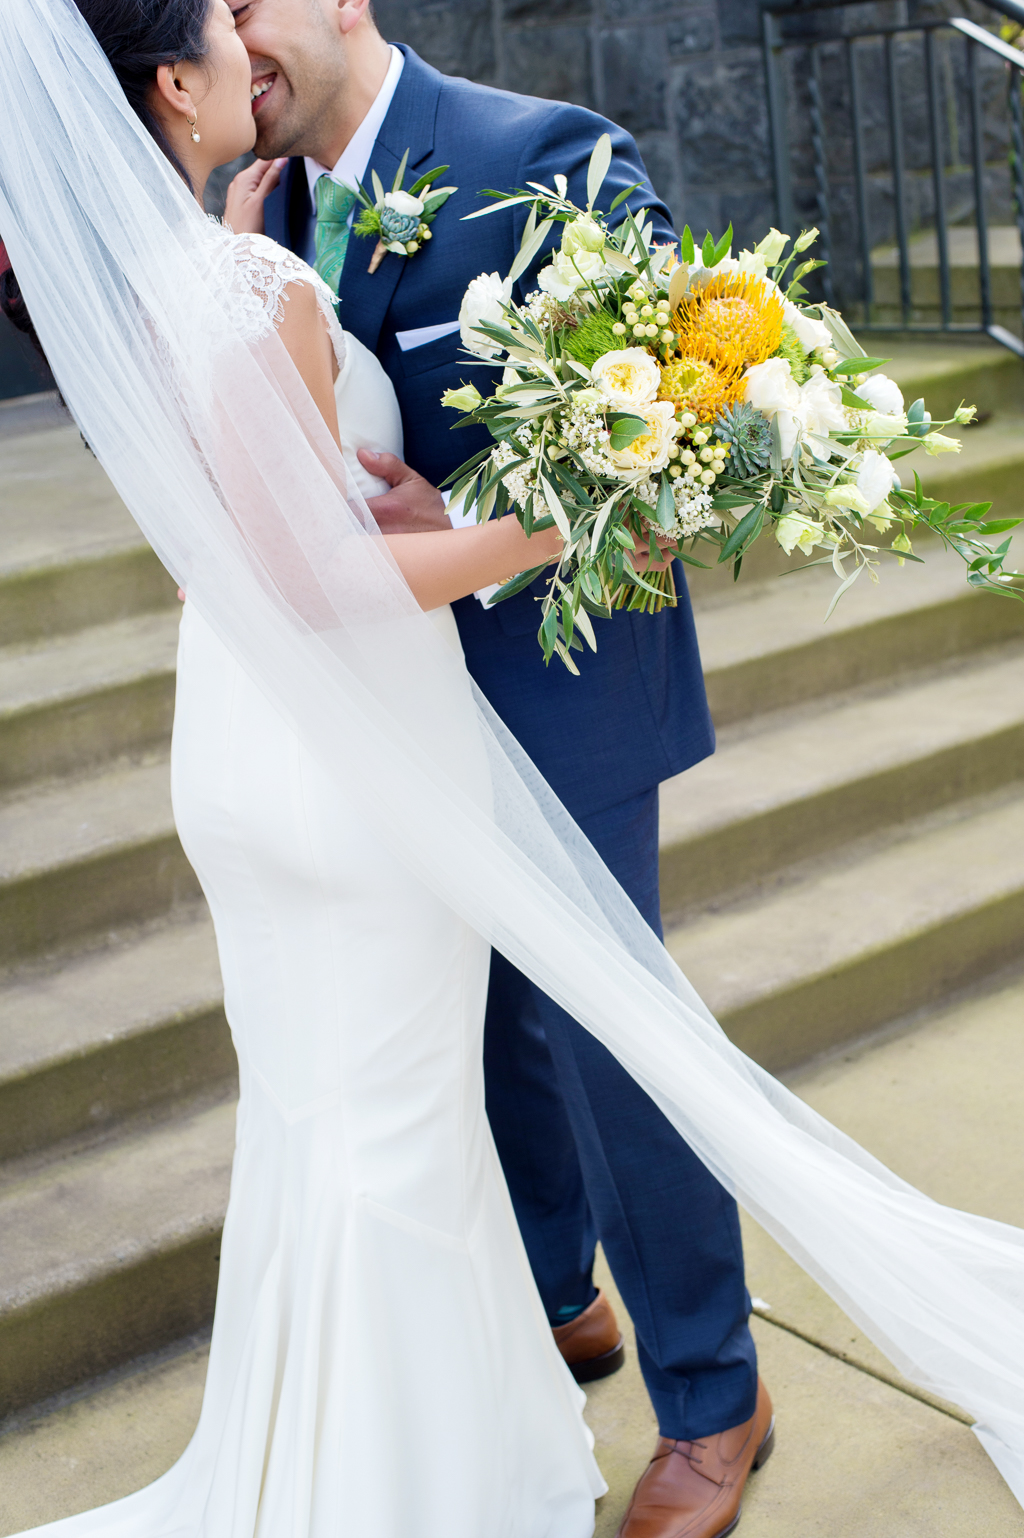 bride with very long wedding veil holds vibrant yellow and white bouquet